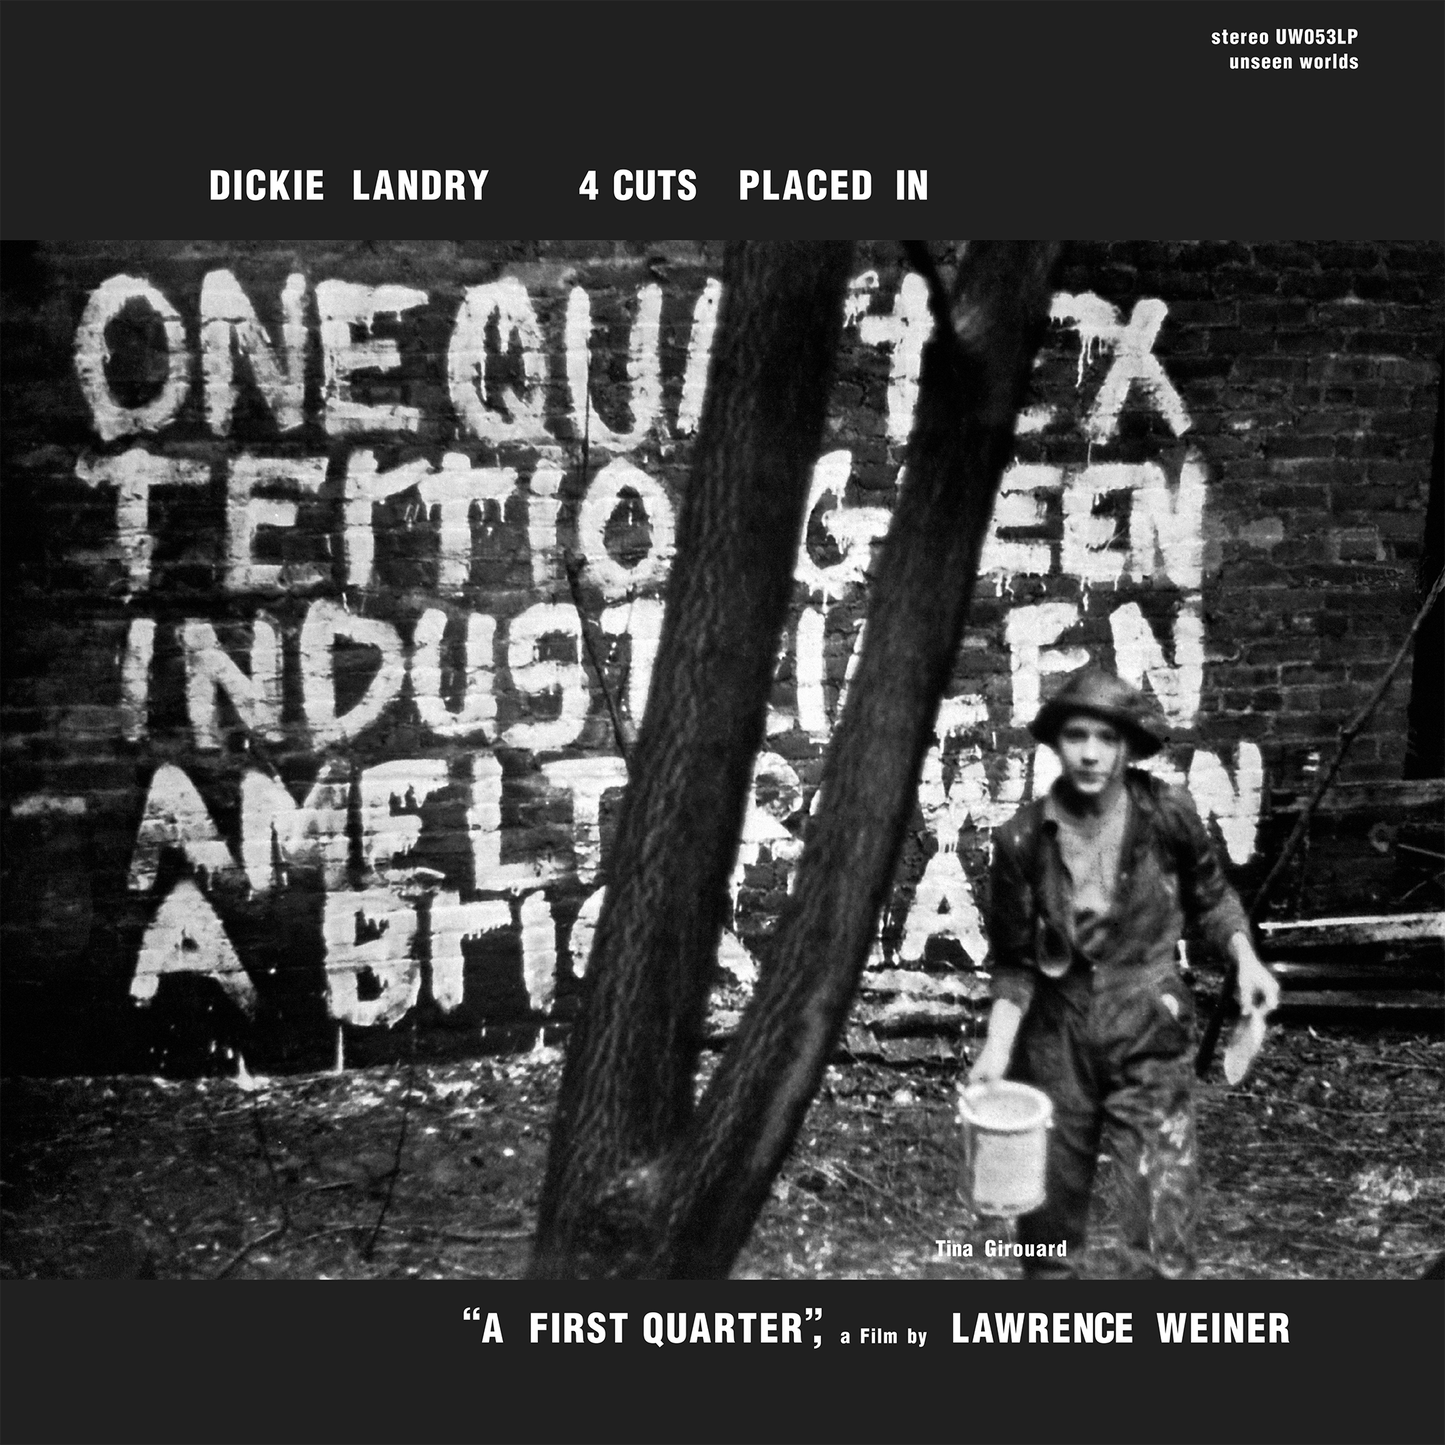 Dickie Landry - 4 Cuts Placed in "A First Quarter"